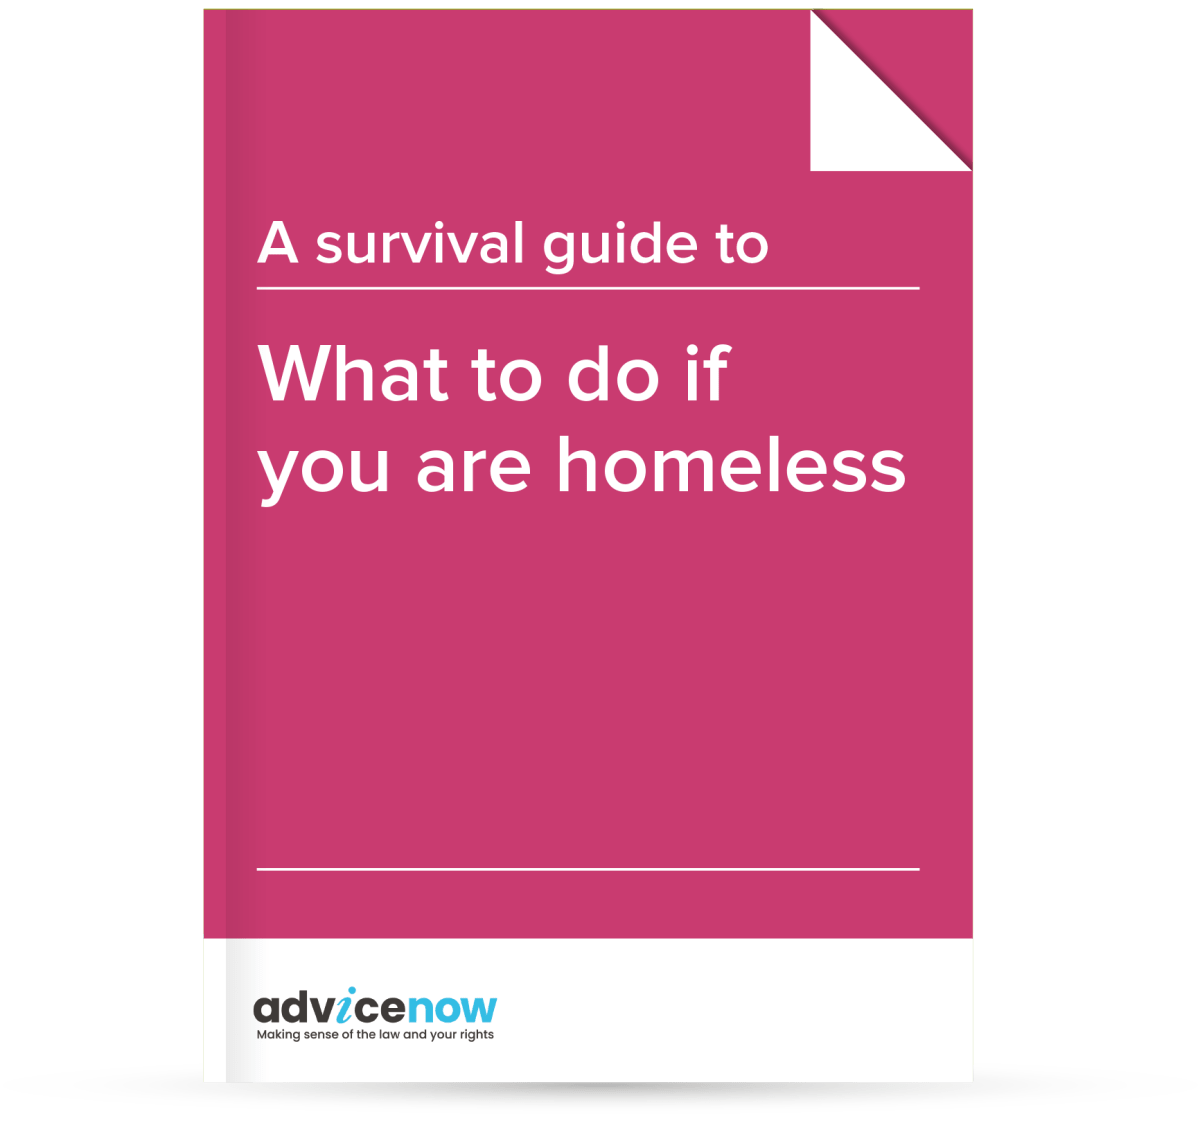 a-survival-guide-to-what-to-do-if-you-are-homeless-advicenow